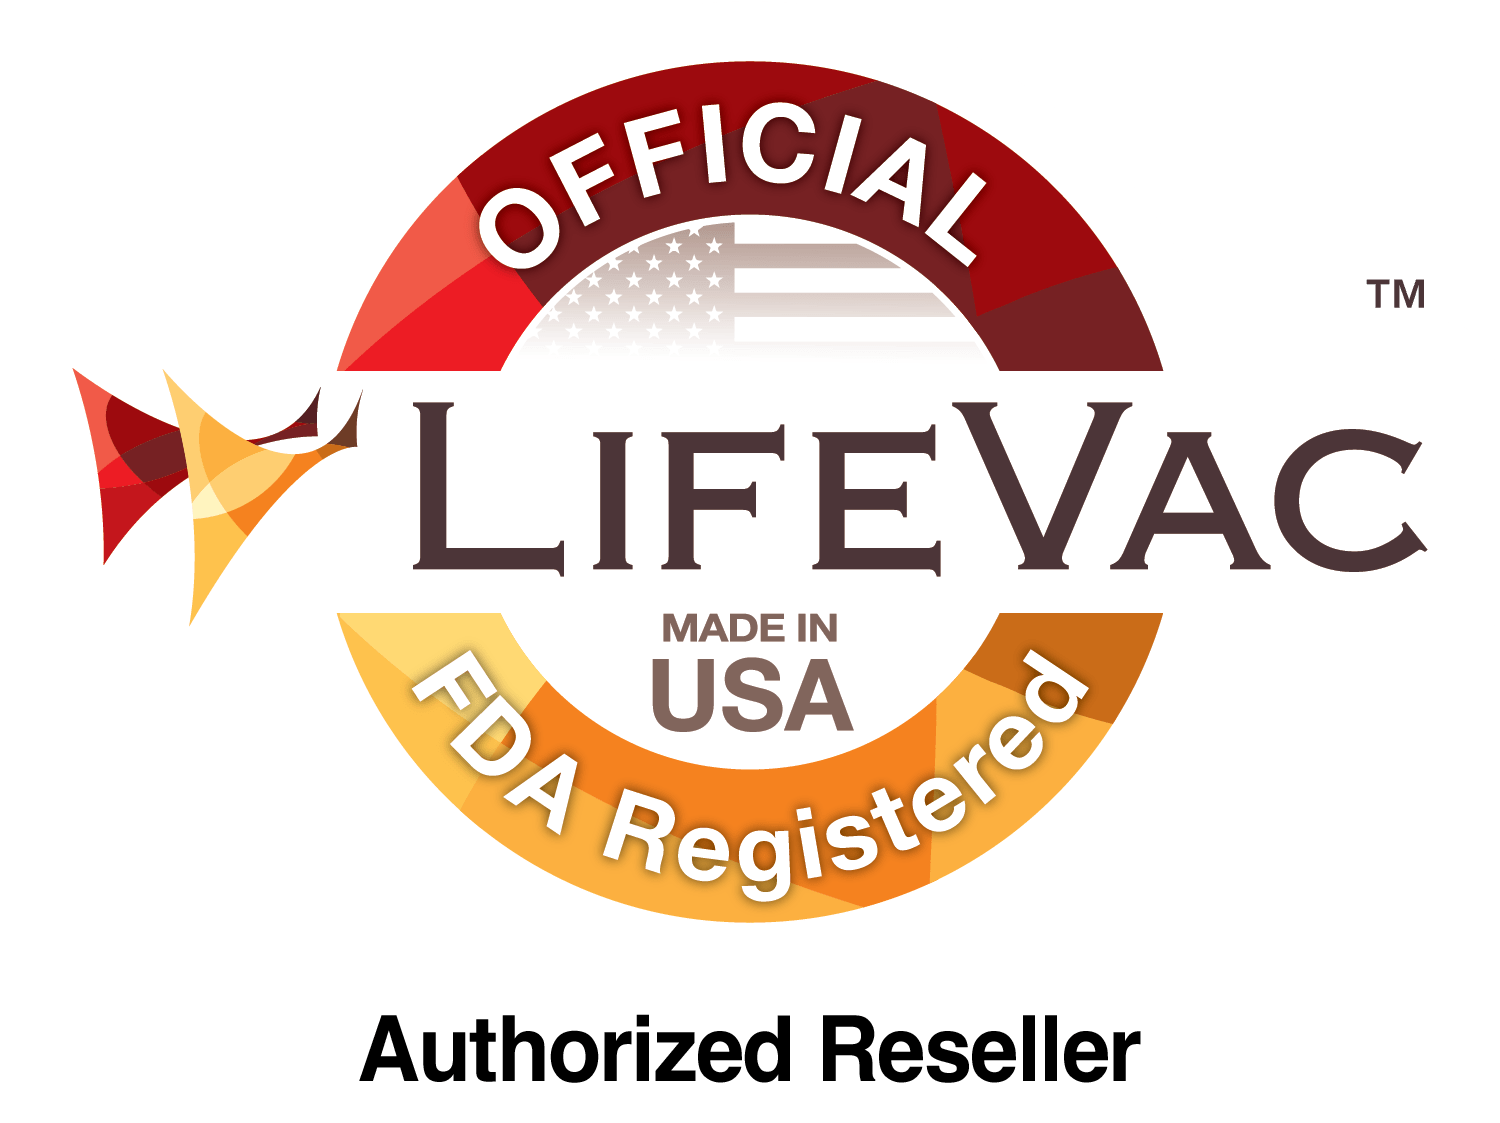 Authorized Reseller of the LifeVac USA